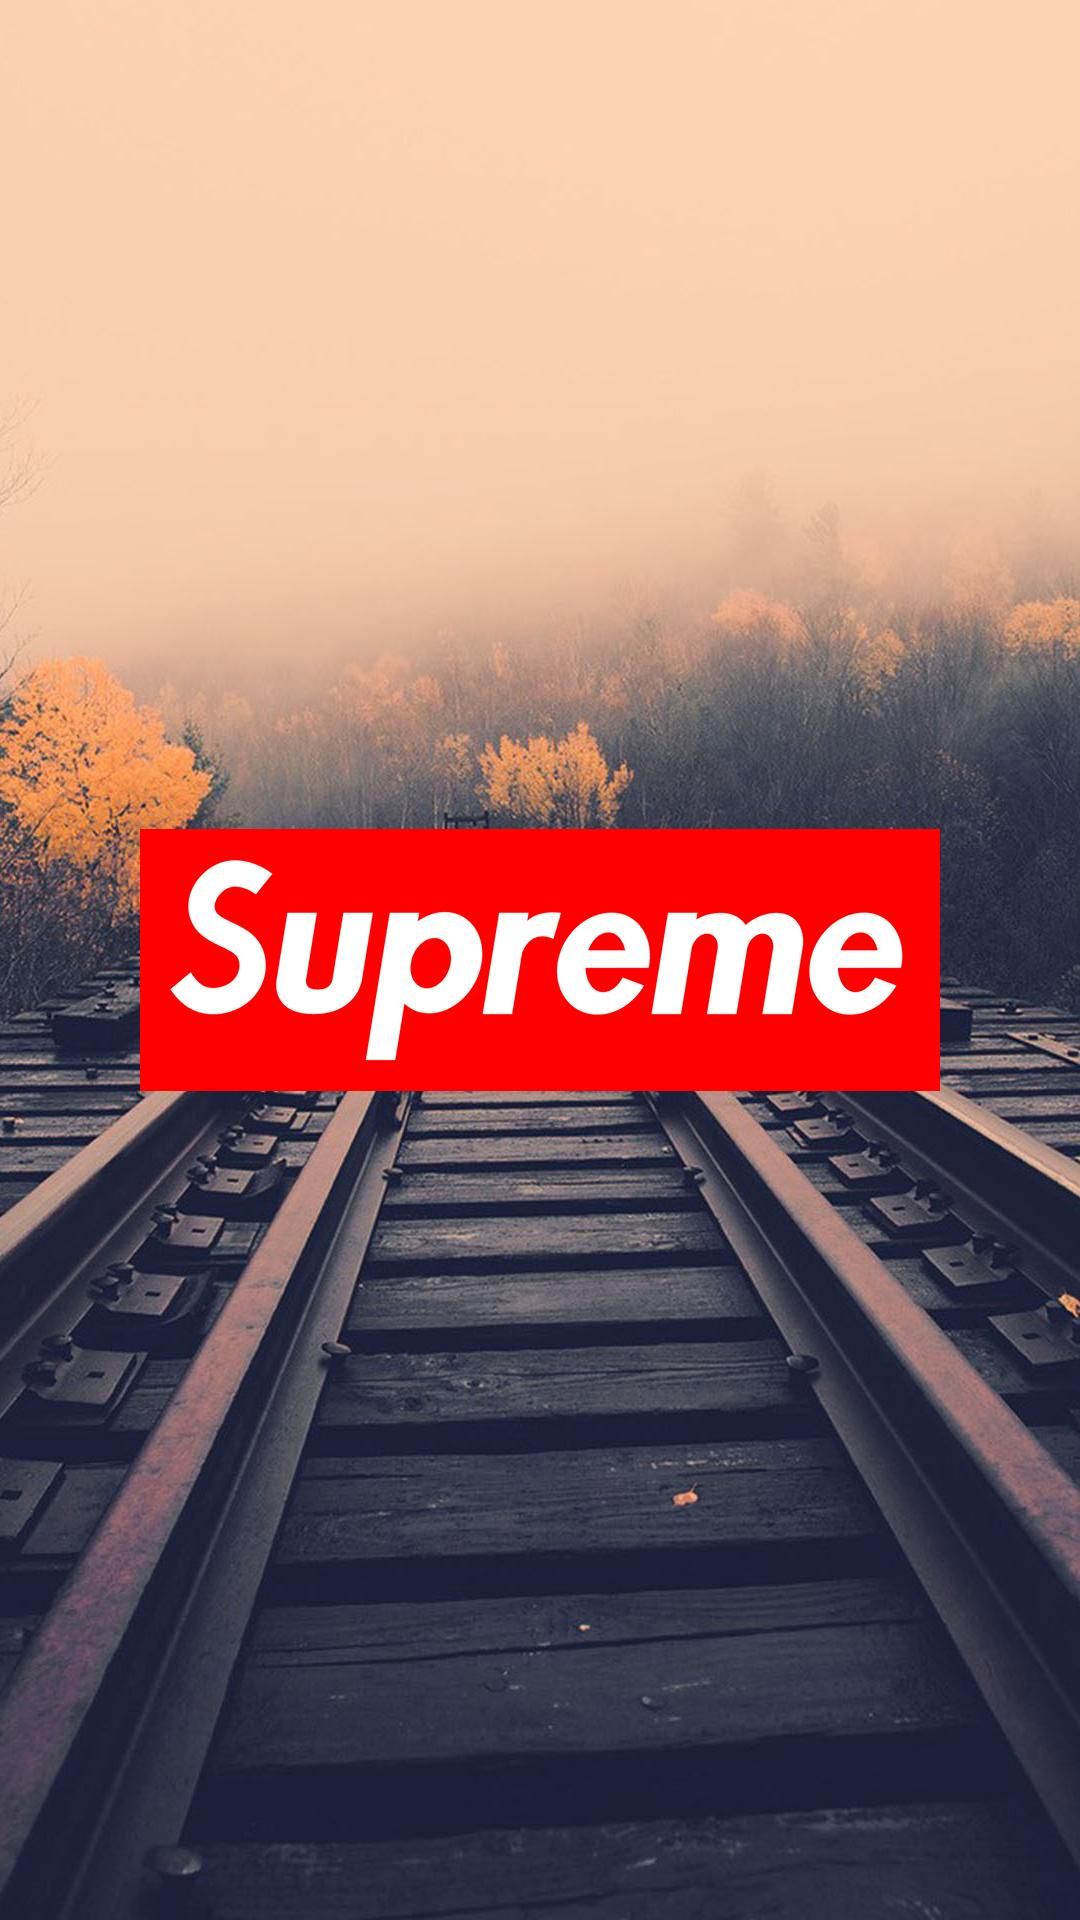 SUPREME Apple iPhone 7 Plus hd wallpapers available for 1080x1920